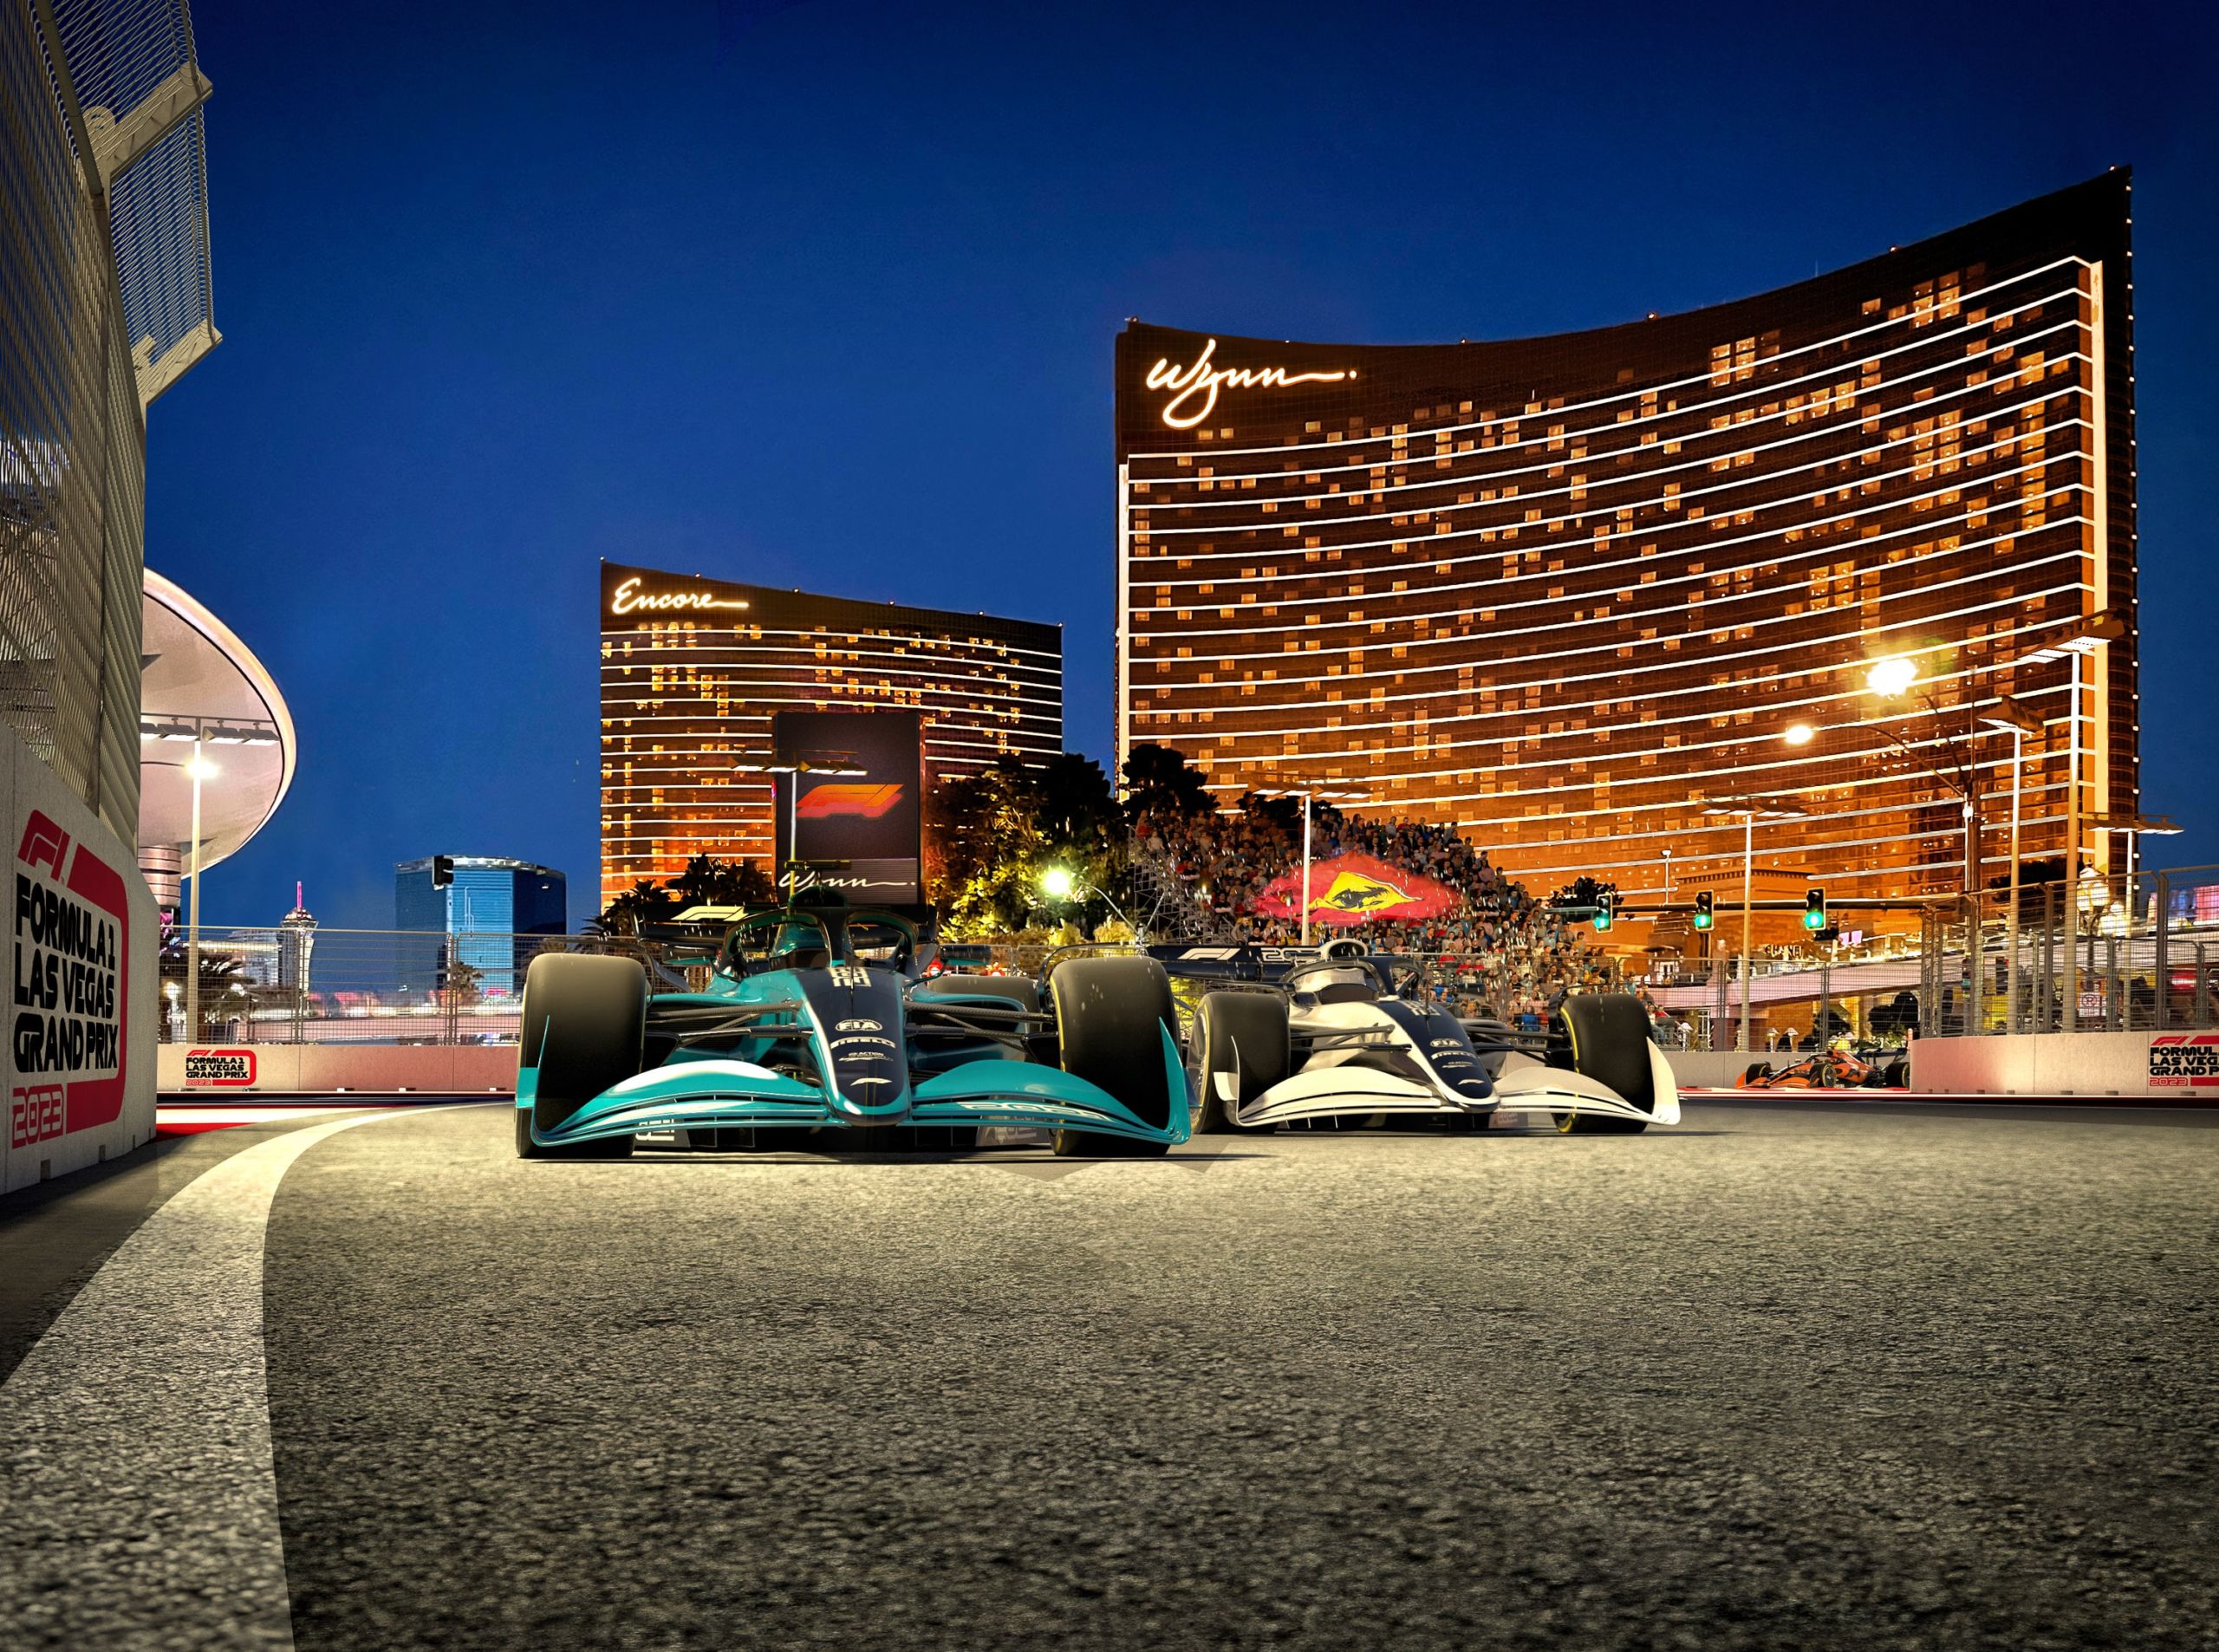 Some Formula 1 fans are suing the group after an hours-long Las Vegas race  delay : NPR